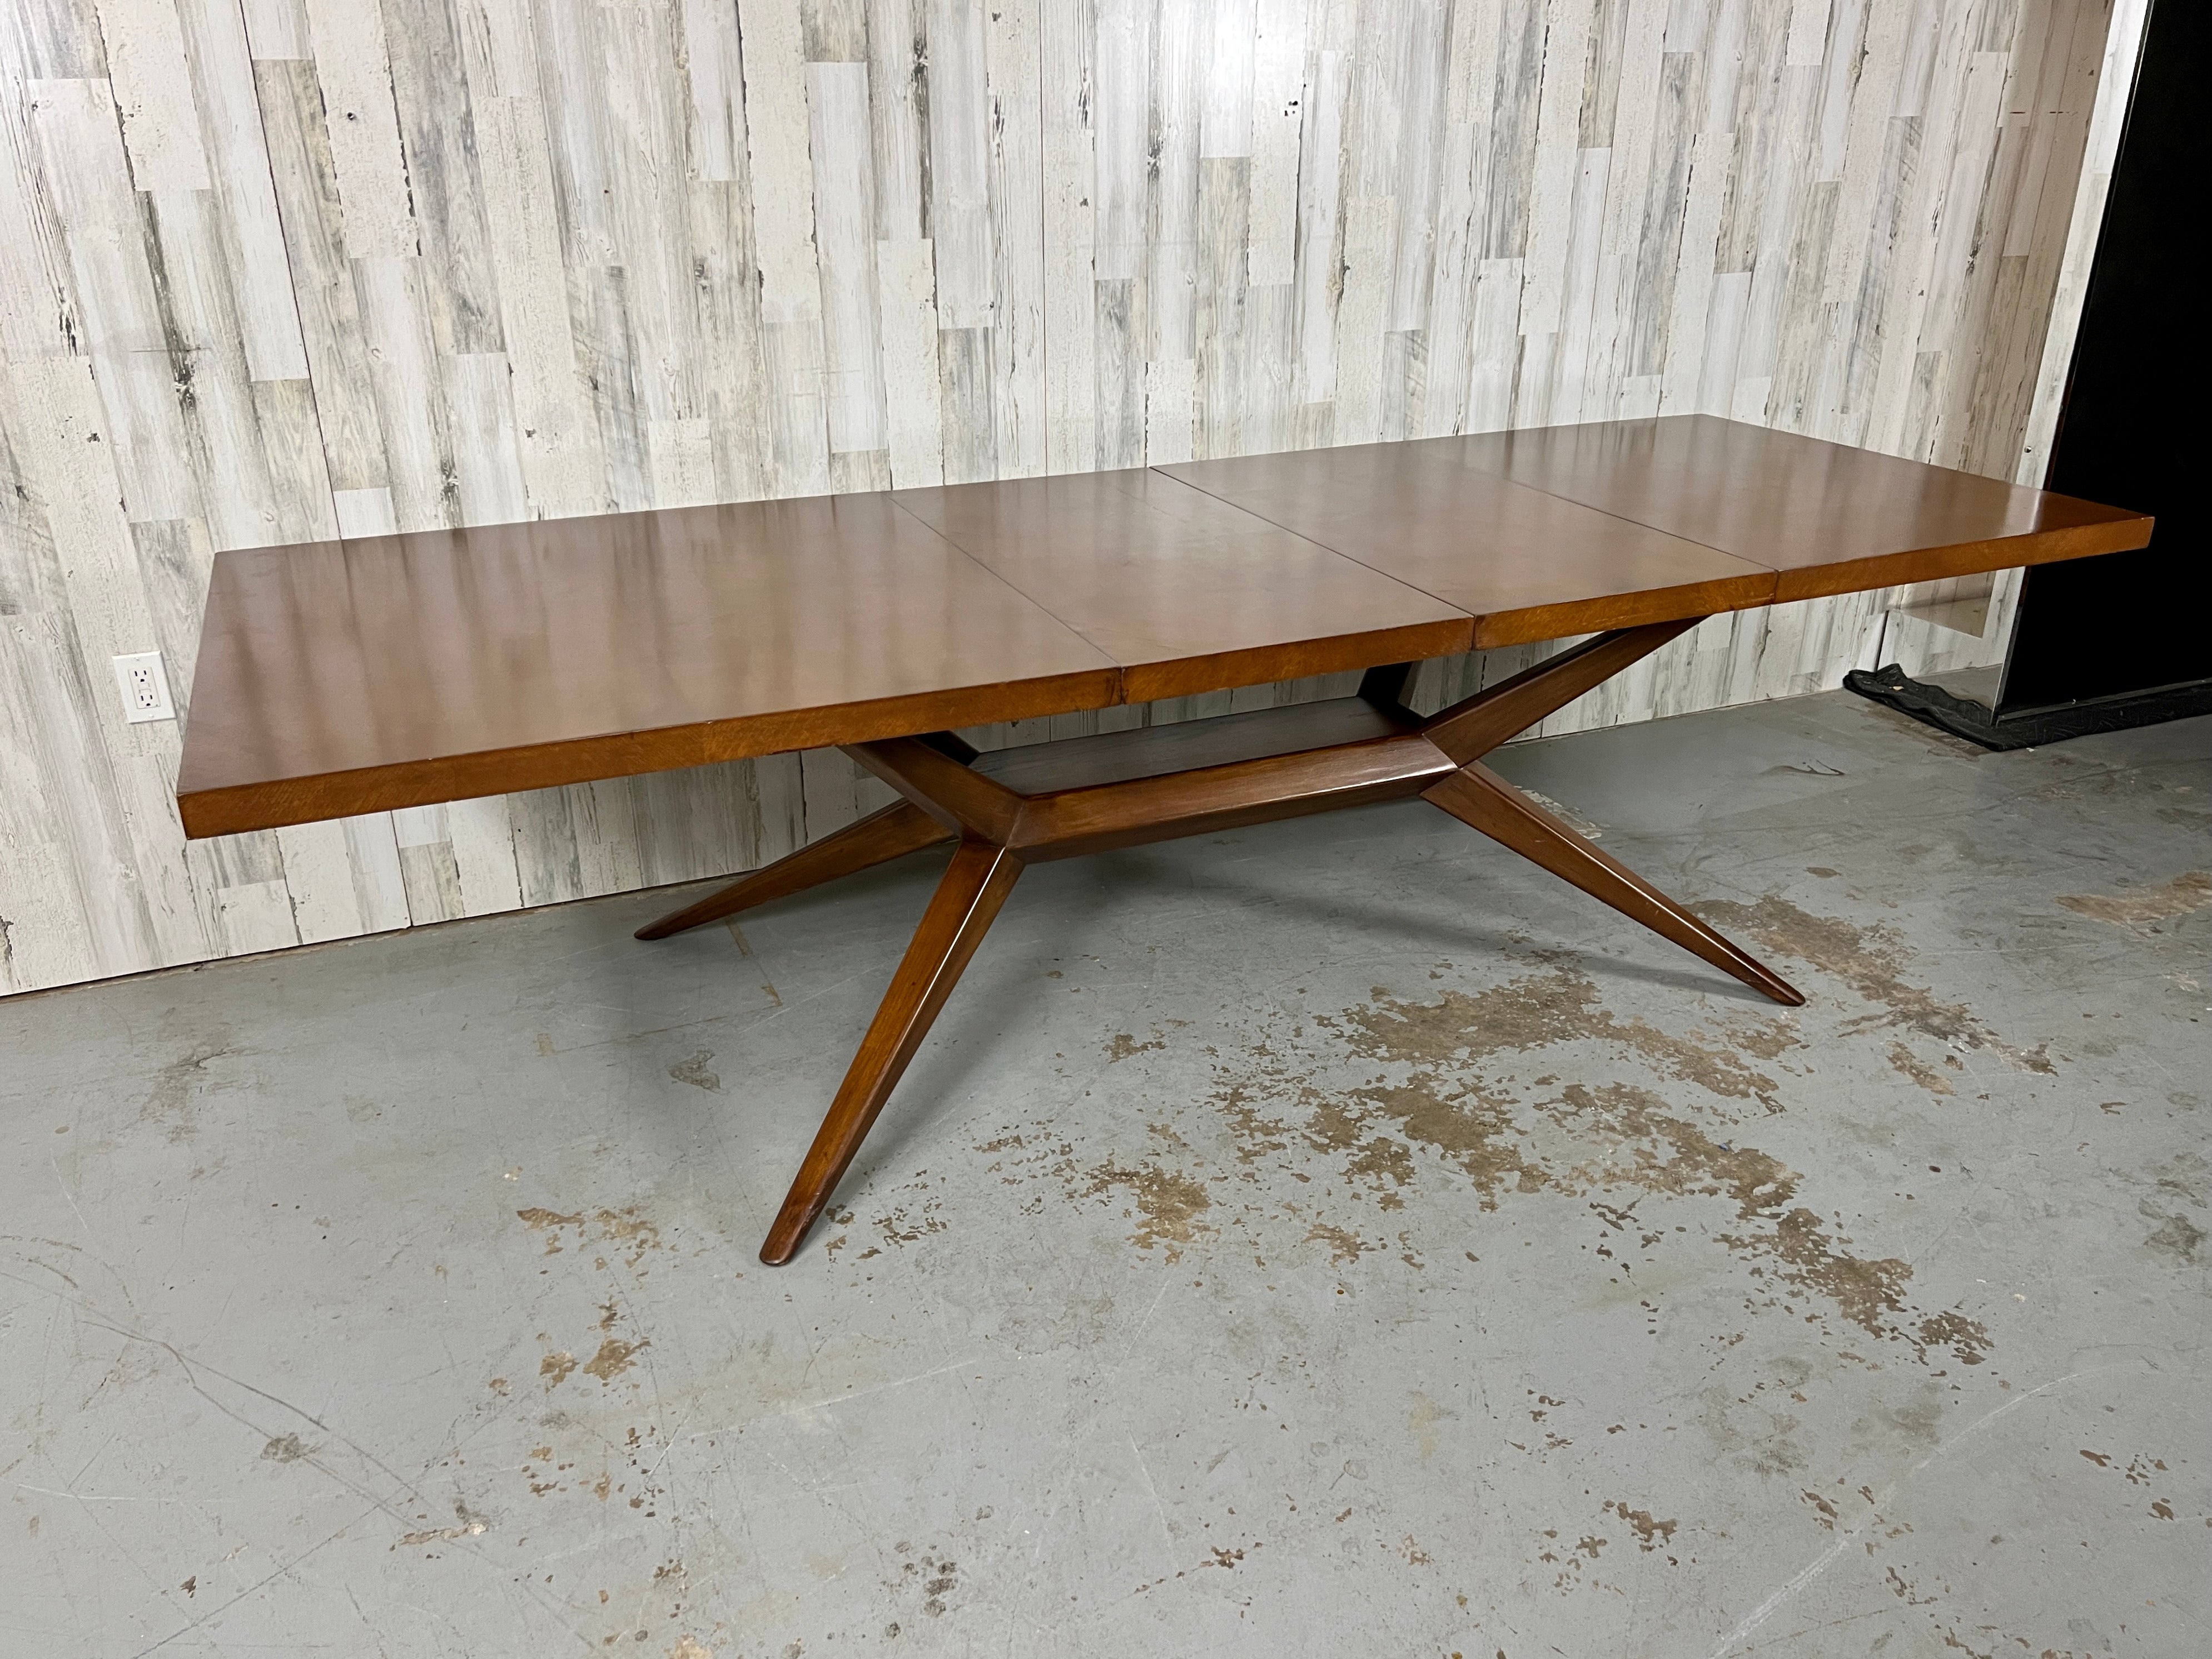 Harold Schwartz for Romweber Spider Leg Extendable Dining Table. Parquetry top, sculpted wood legs, and cutlery drawers on each end. A great table for people who love to entertain! 
There are two leaves each measures 20